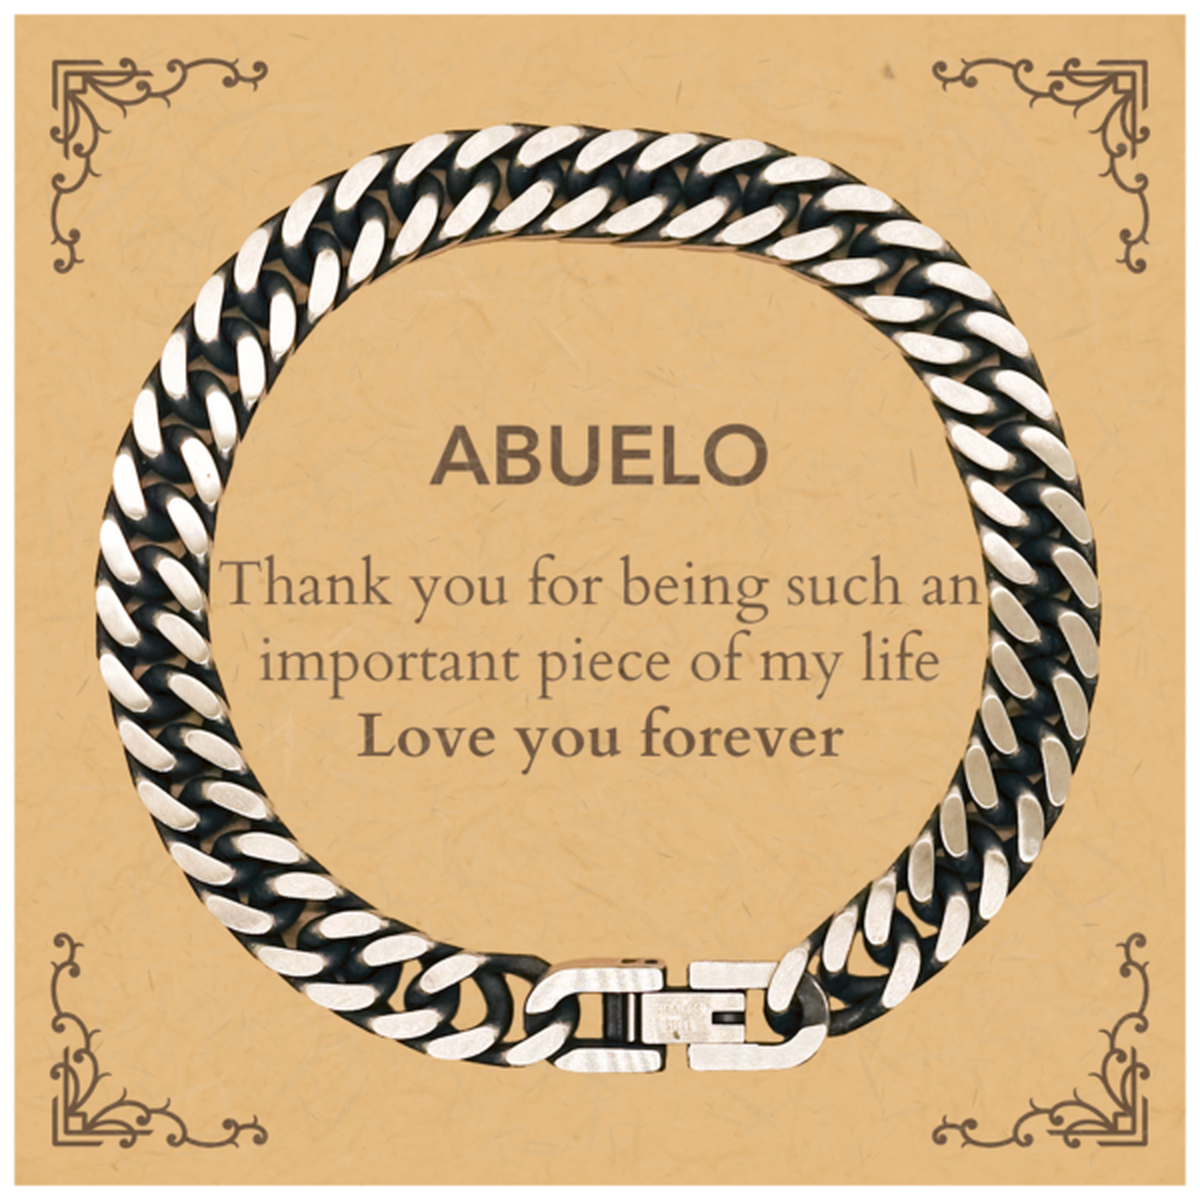 Appropriate Abuelo Cuban Link Chain Bracelet Epic Birthday Gifts for Abuelo Thank you for being such an important piece of my life Abuelo Christmas Mothers Fathers Day